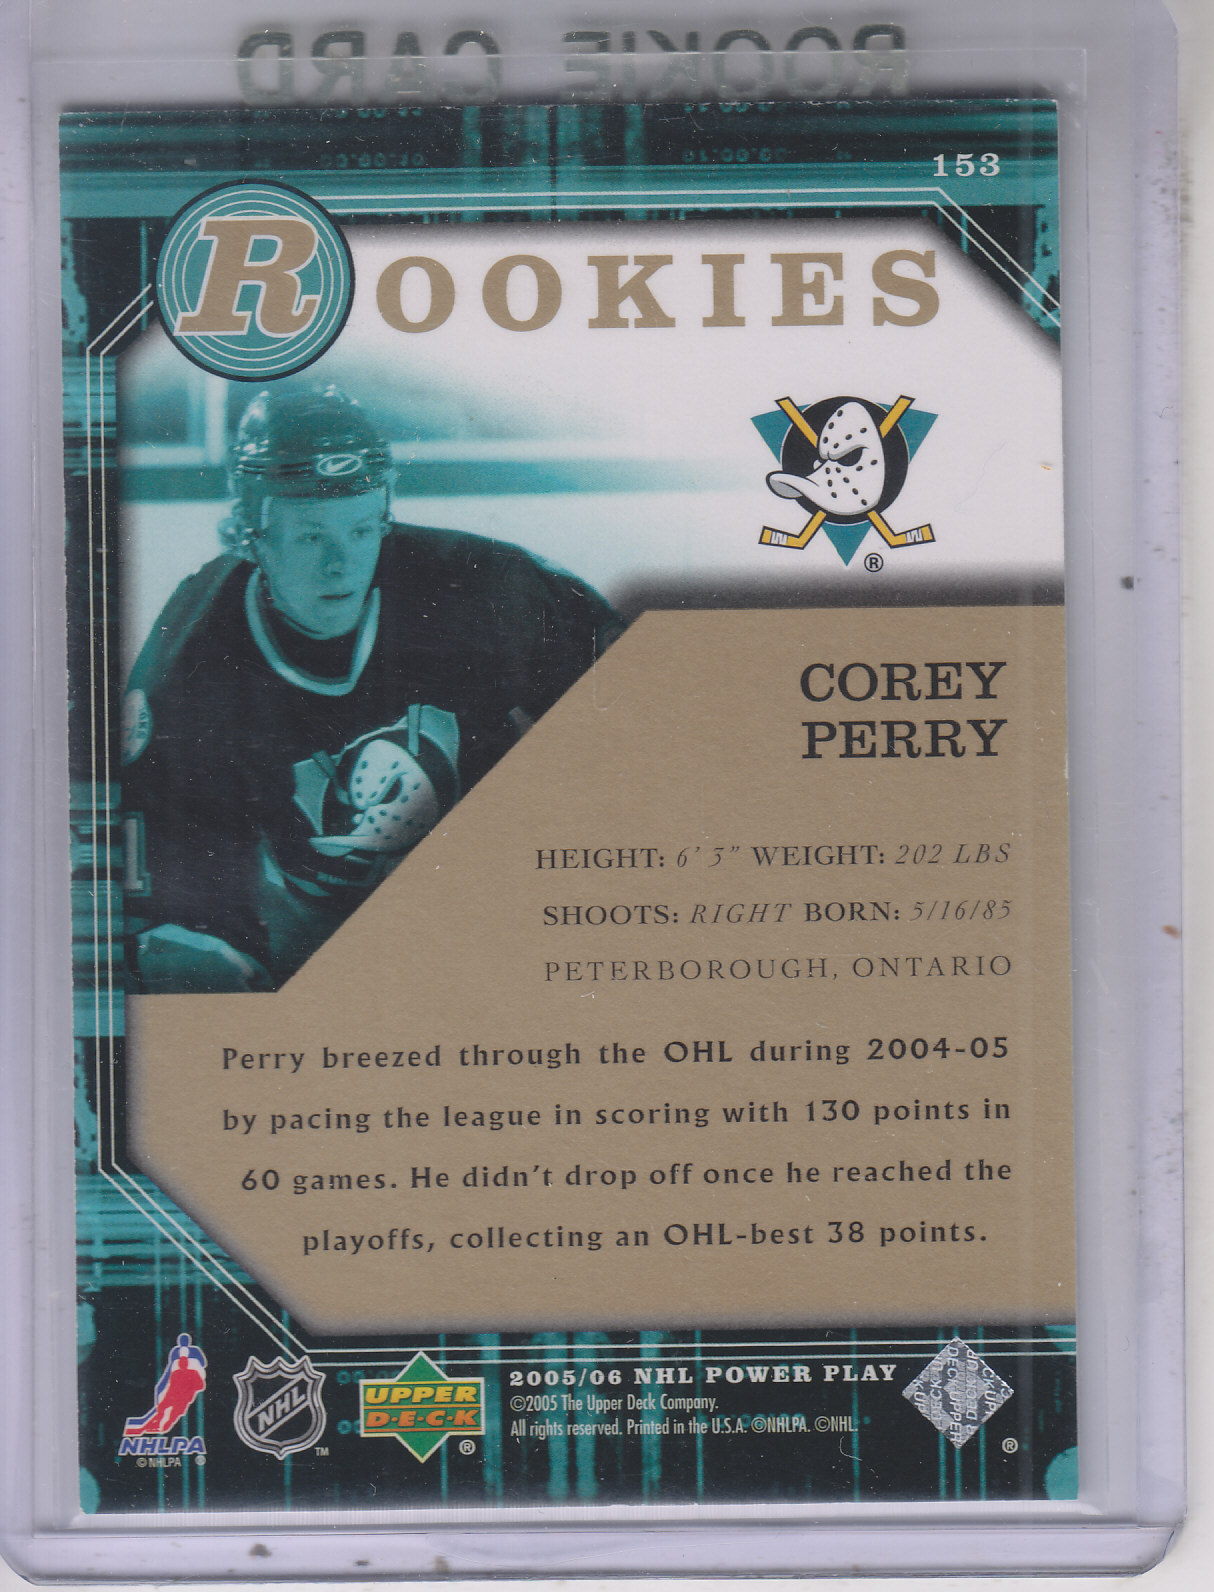 2005-06 Upper Deck Power Play #153 Corey Perry RC back image